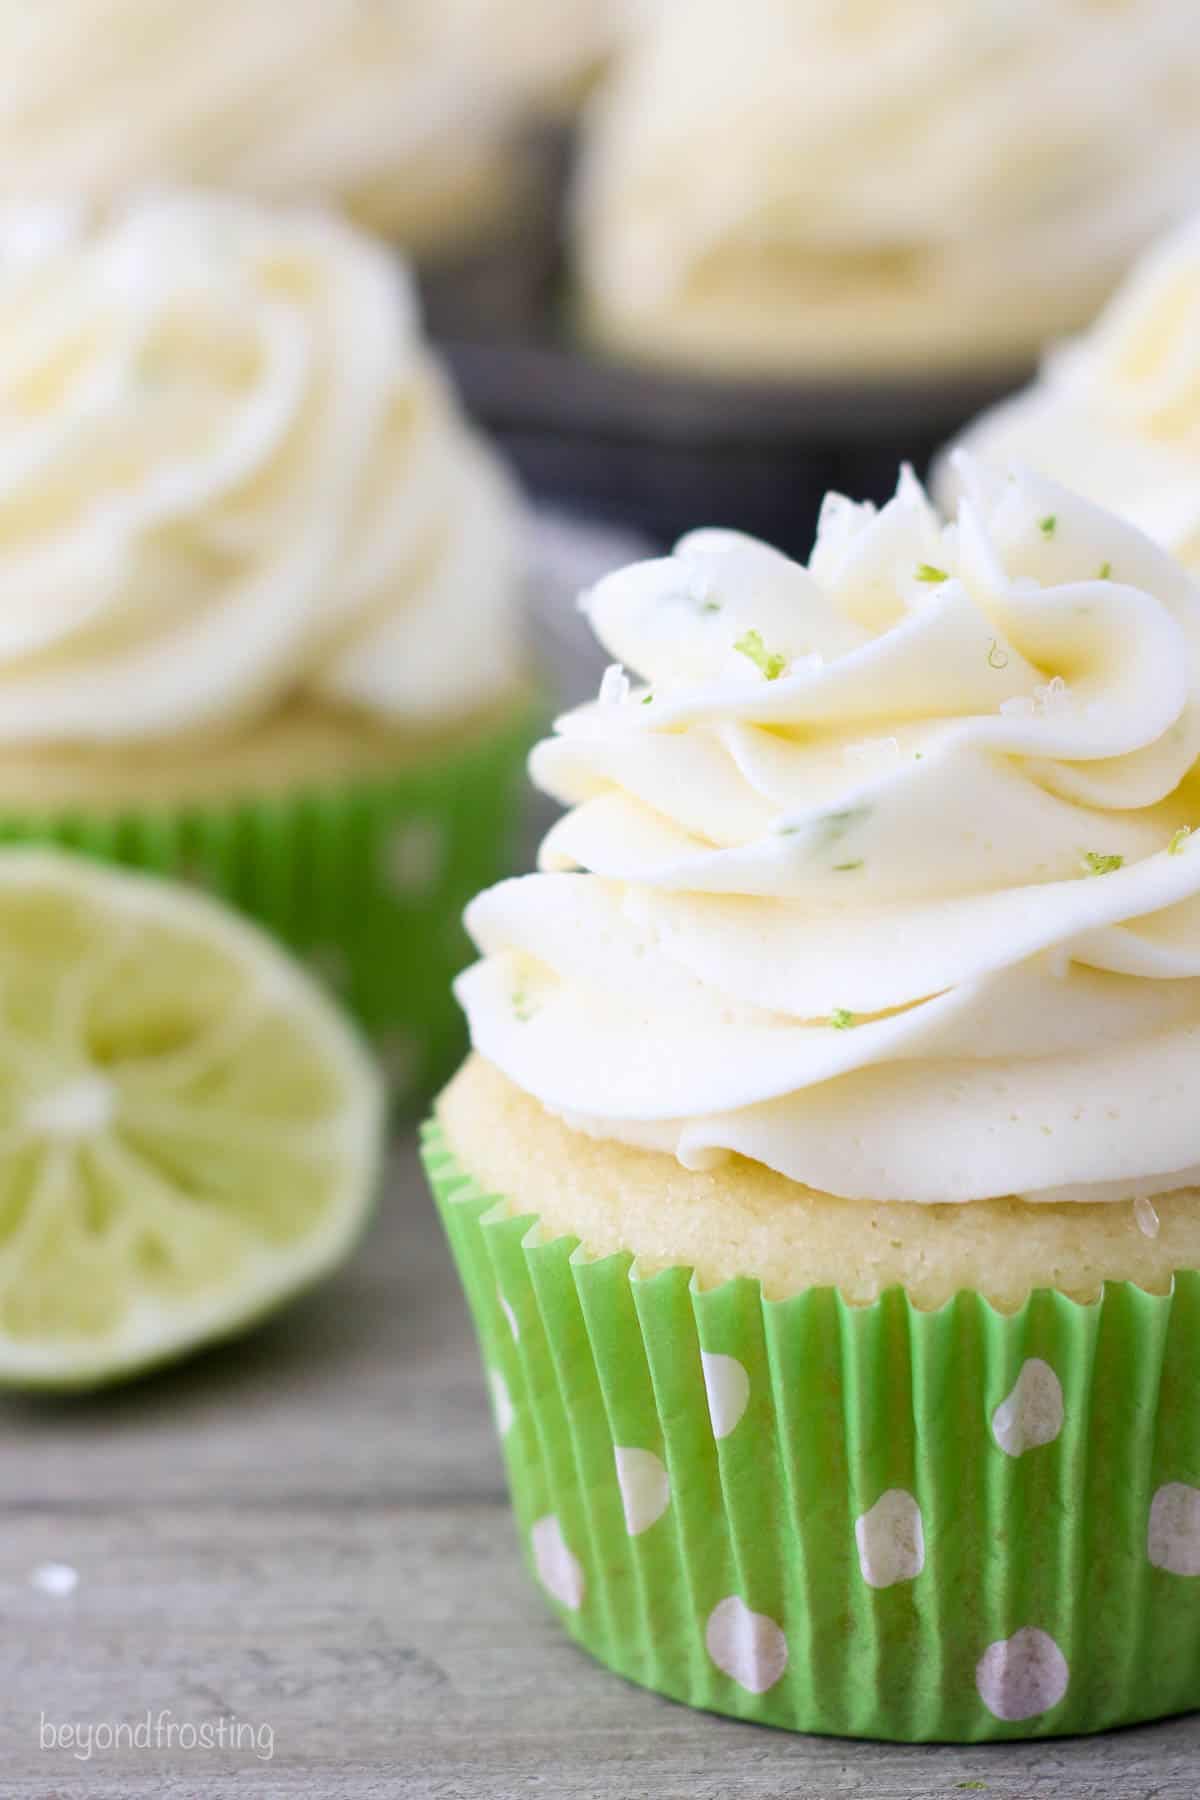 A close up of a frosted margarita cupcake in a green polka dot liner